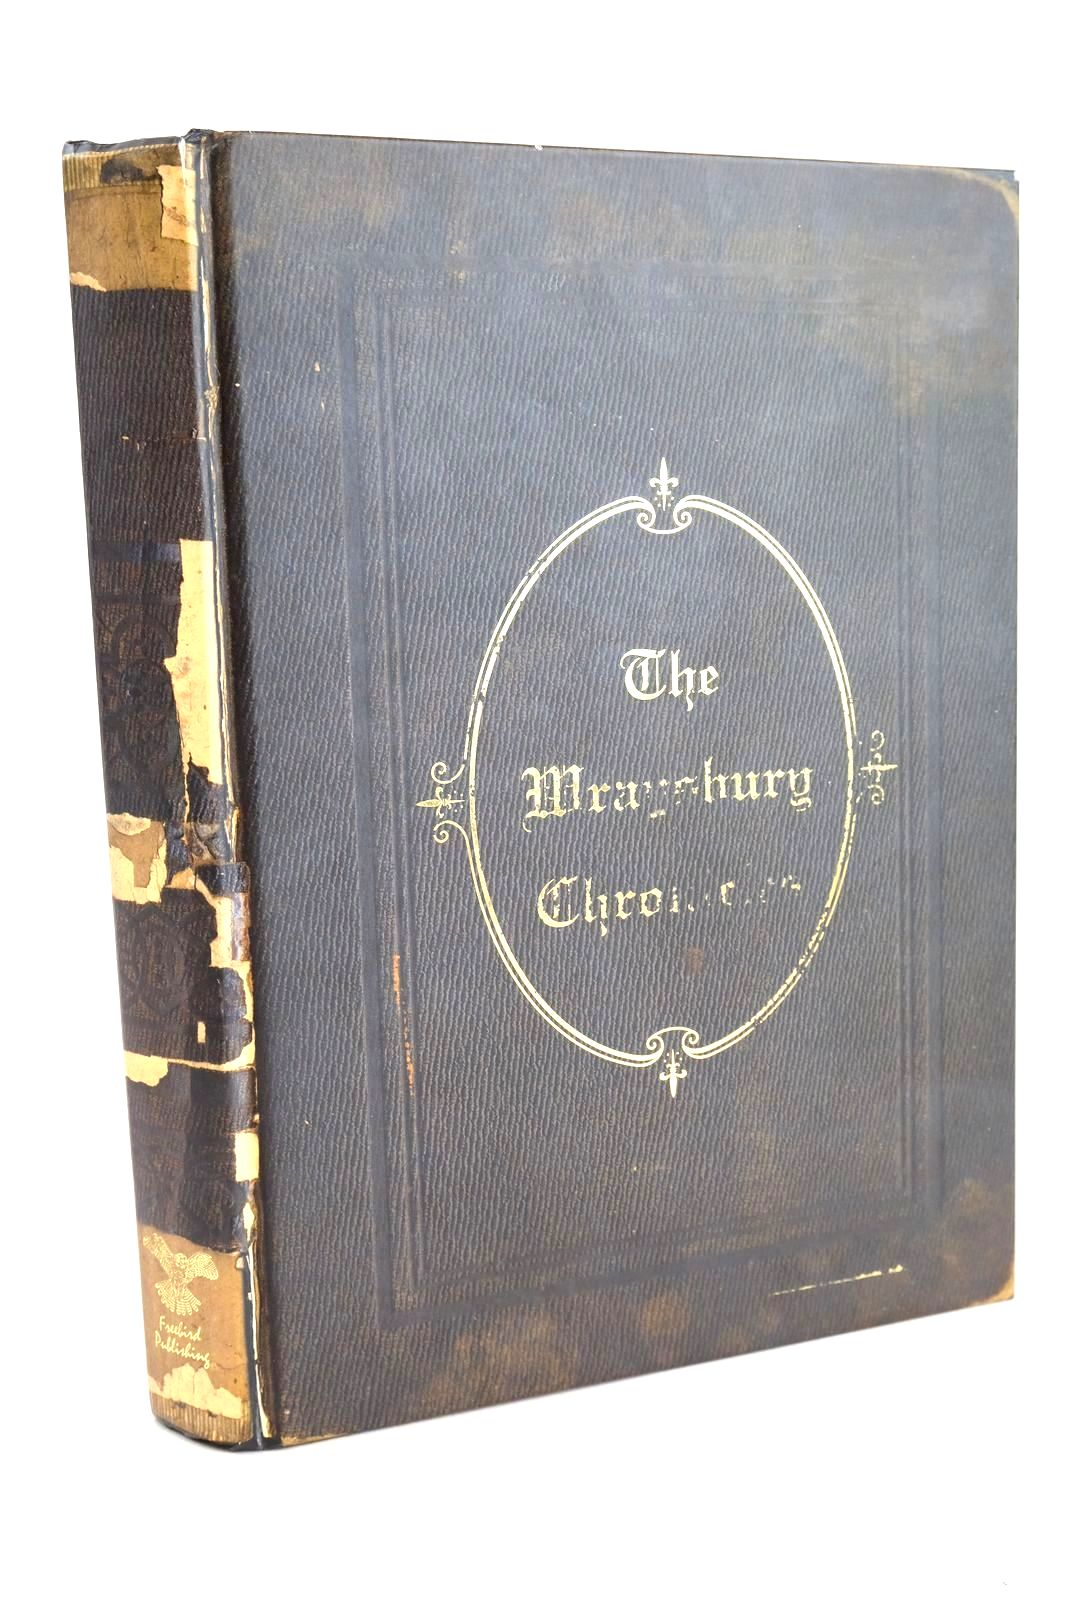 Photo of THE WRAYSBURY CHRONICLES written by Jenkins, Keith et al, published by Freebird Publishing (STOCK CODE: 1327513)  for sale by Stella & Rose's Books